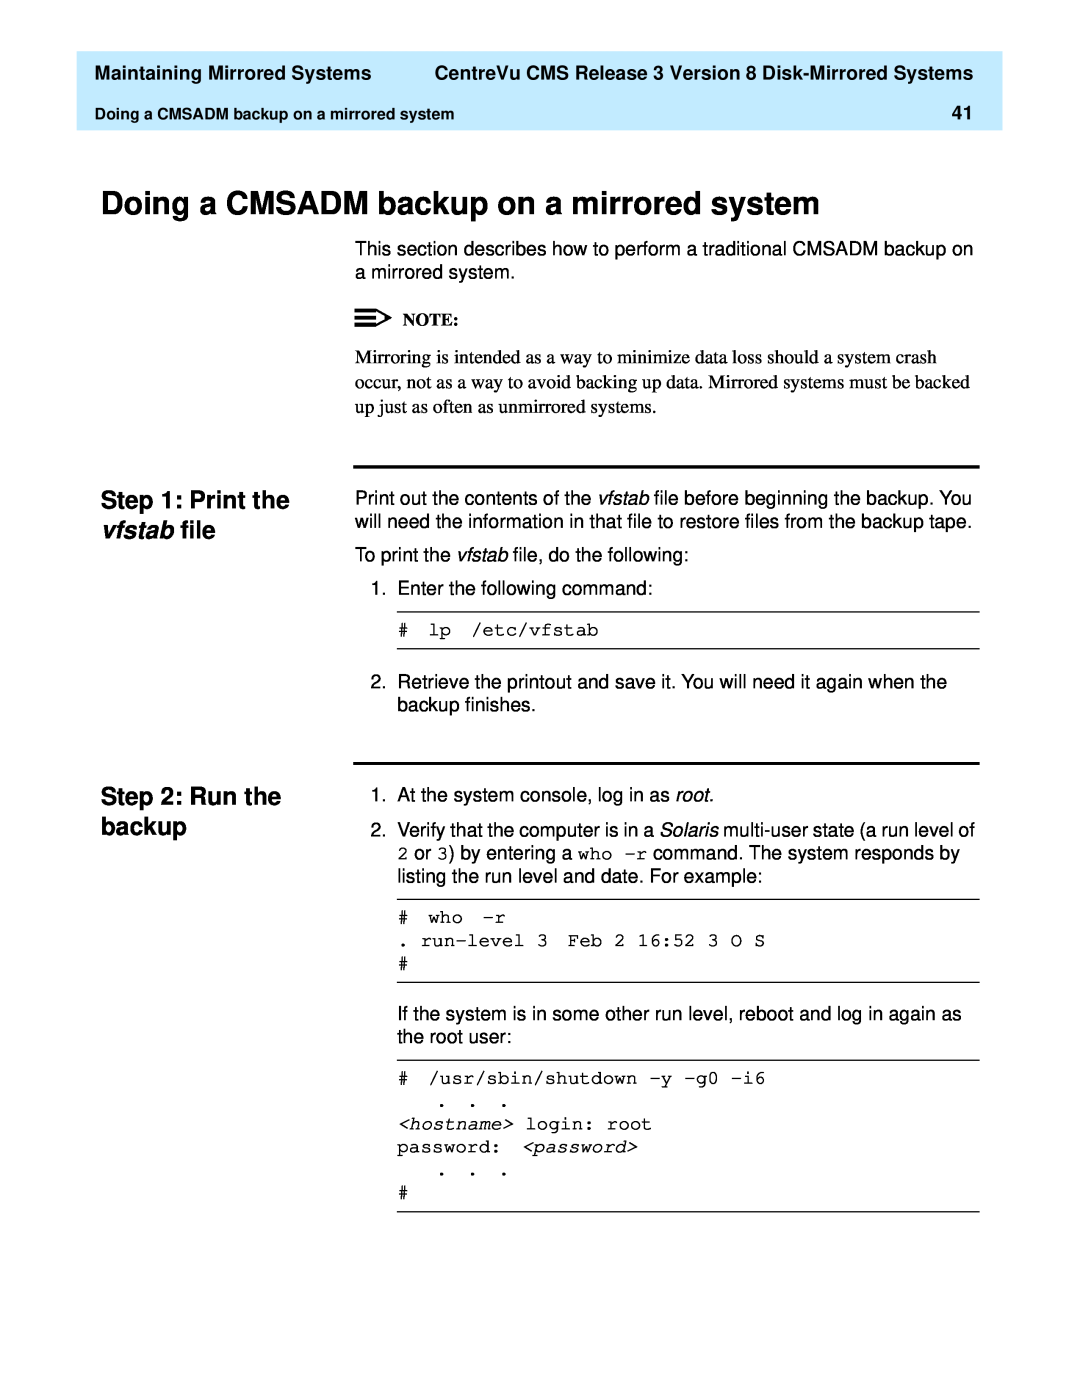 Lucent Technologies 585-210-940 manual Doing a CMSADM backup on a mirrored system, Print the vfstab file, Run the backup 